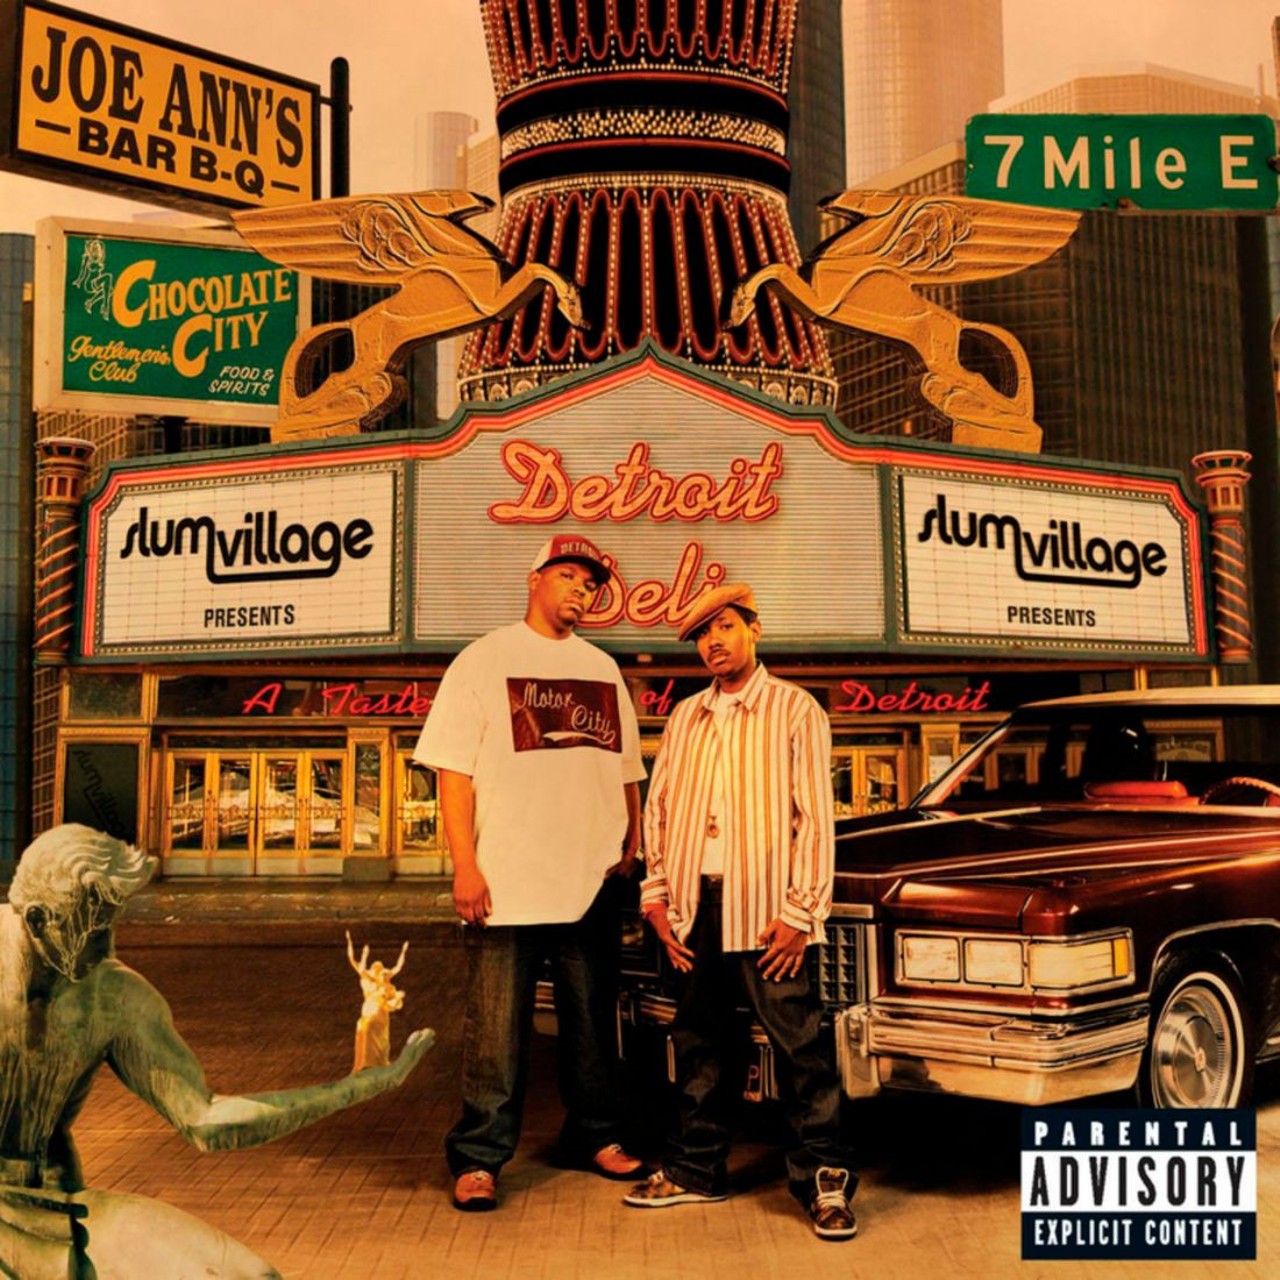  "Selfish," by Slum Village
Slum Village, the hip-hop group across the lake from Detroit, is known for having one of the most influential producers in the genre, J Dilla. While Dilla split from the group in 2001 a pre-megastar Kanye West takes over the production duties and even has a verse on &#147;Selfish.&#148; It's an ode to females across the Globe. Elzhi raps and thanks, Jonetta from Cleveland for &#147;some good head&#148; in her Jetta. (Clever).  
Detroit Deli album art